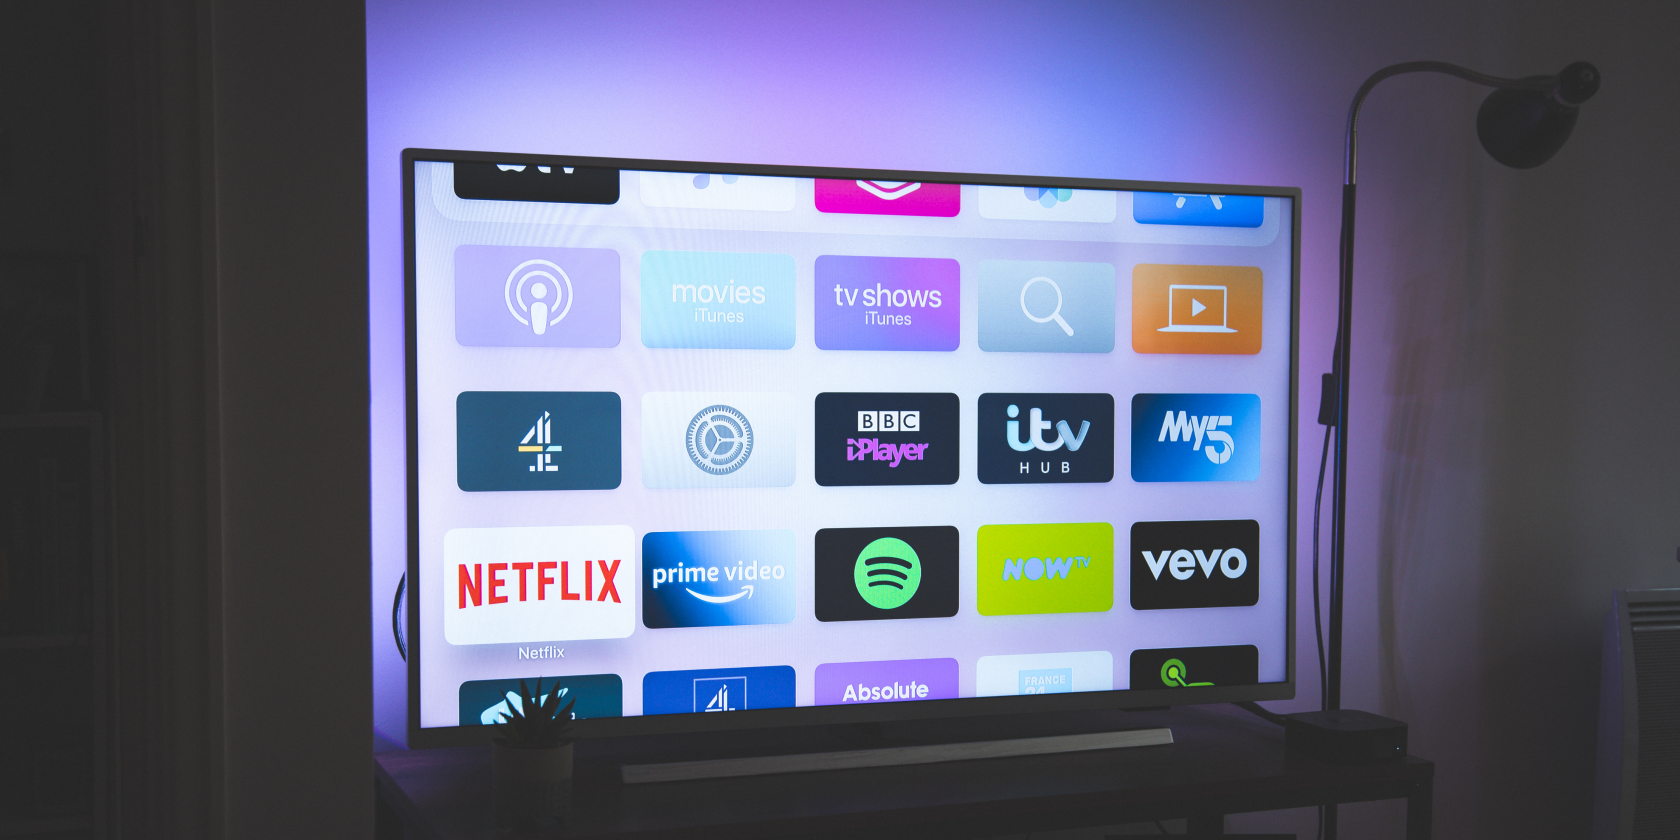 Your Fire TV can include many apps